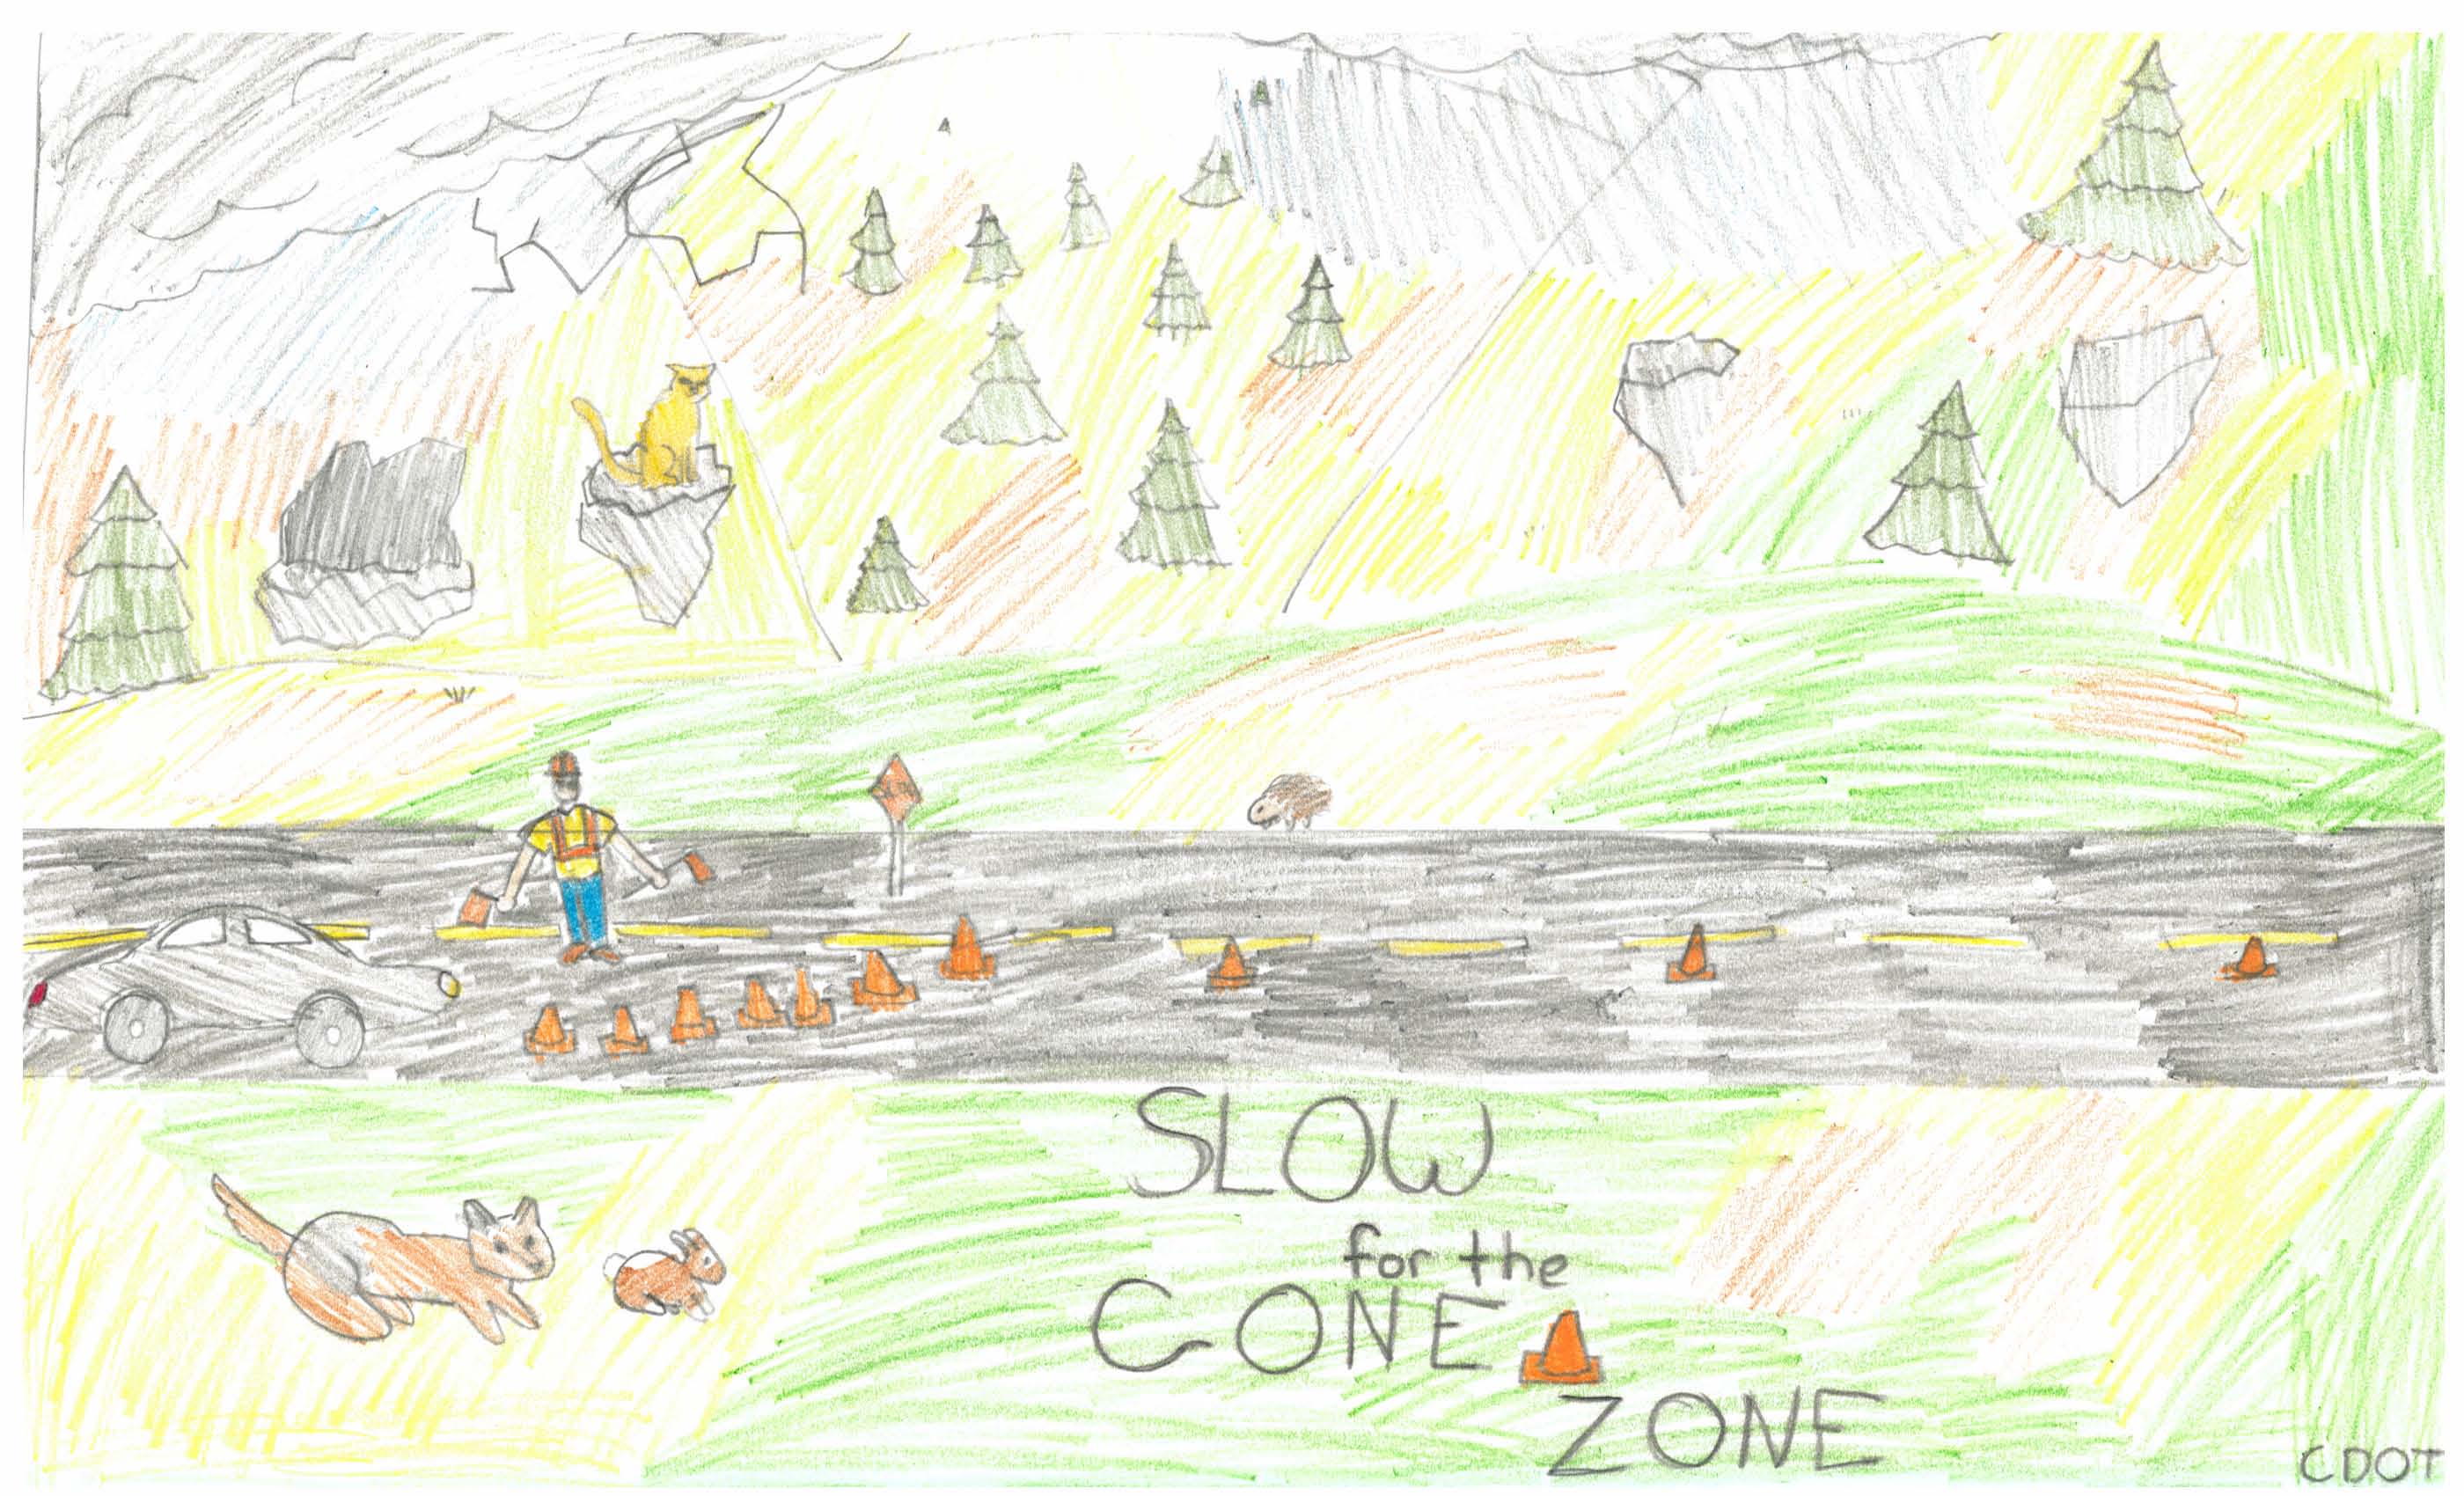 12-14 Year Old Cone Zone Poster Contest Winner detail image